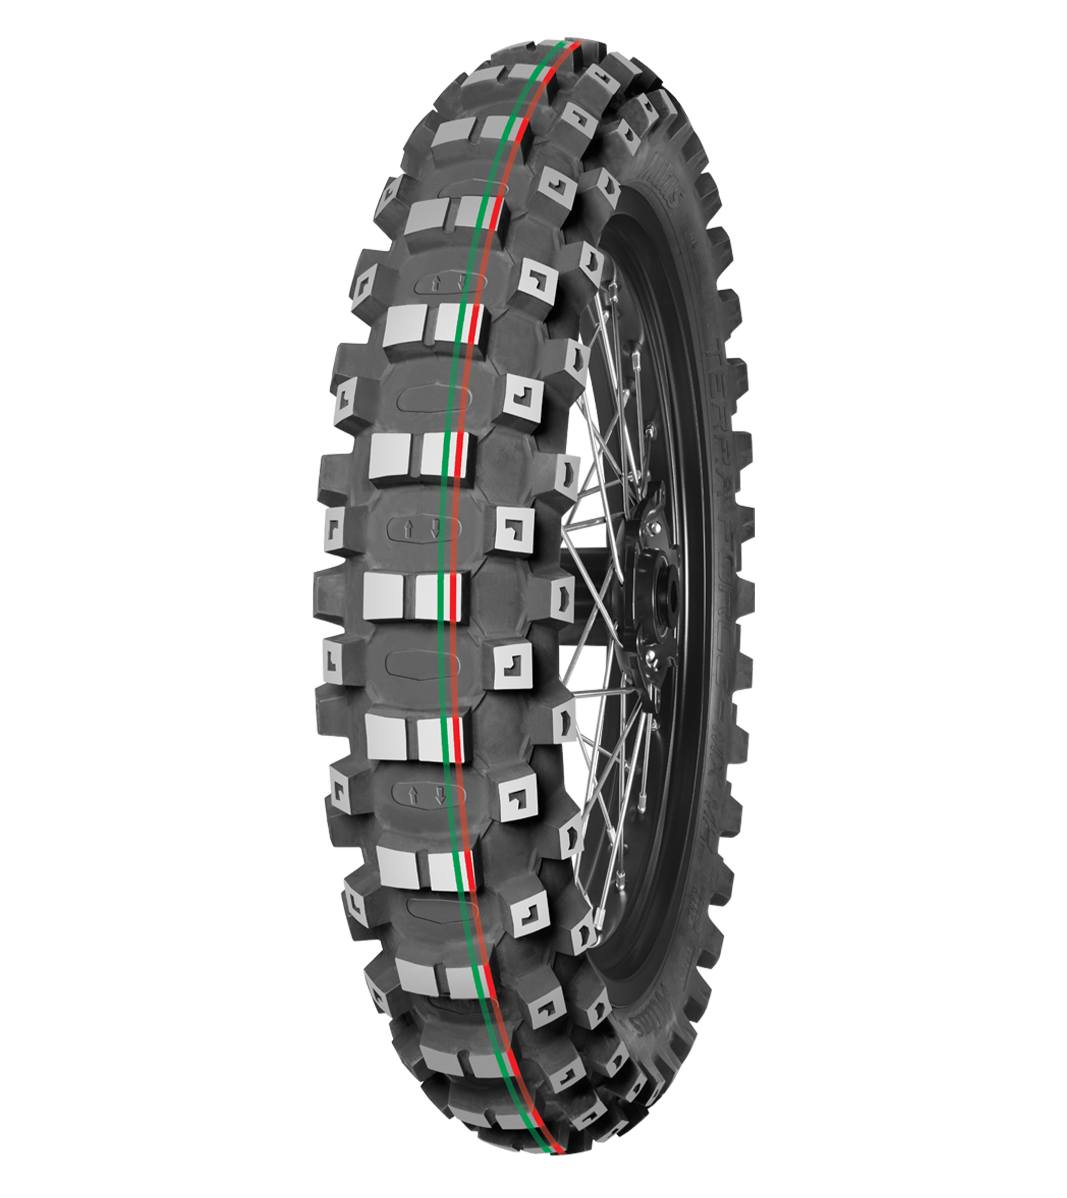 Mitas TERRA FORCE-MX MH 80/100-12 Motocross Competition Off-Road MEDIUM TO HARD 50M Red & Green Tube Rear Tire, 226005, 80/100-12, Motocross, Motocross Competition, Off-Road, Rear, Terra Force, Terra Force-MX MH, Trail, Tires - Imported and distributed in North & South America by Lindeco Genuine Powersports - Premier Powersports Equipment and Accessories for Motorcycle Enthusiasts, Professional Riders and Dealers.